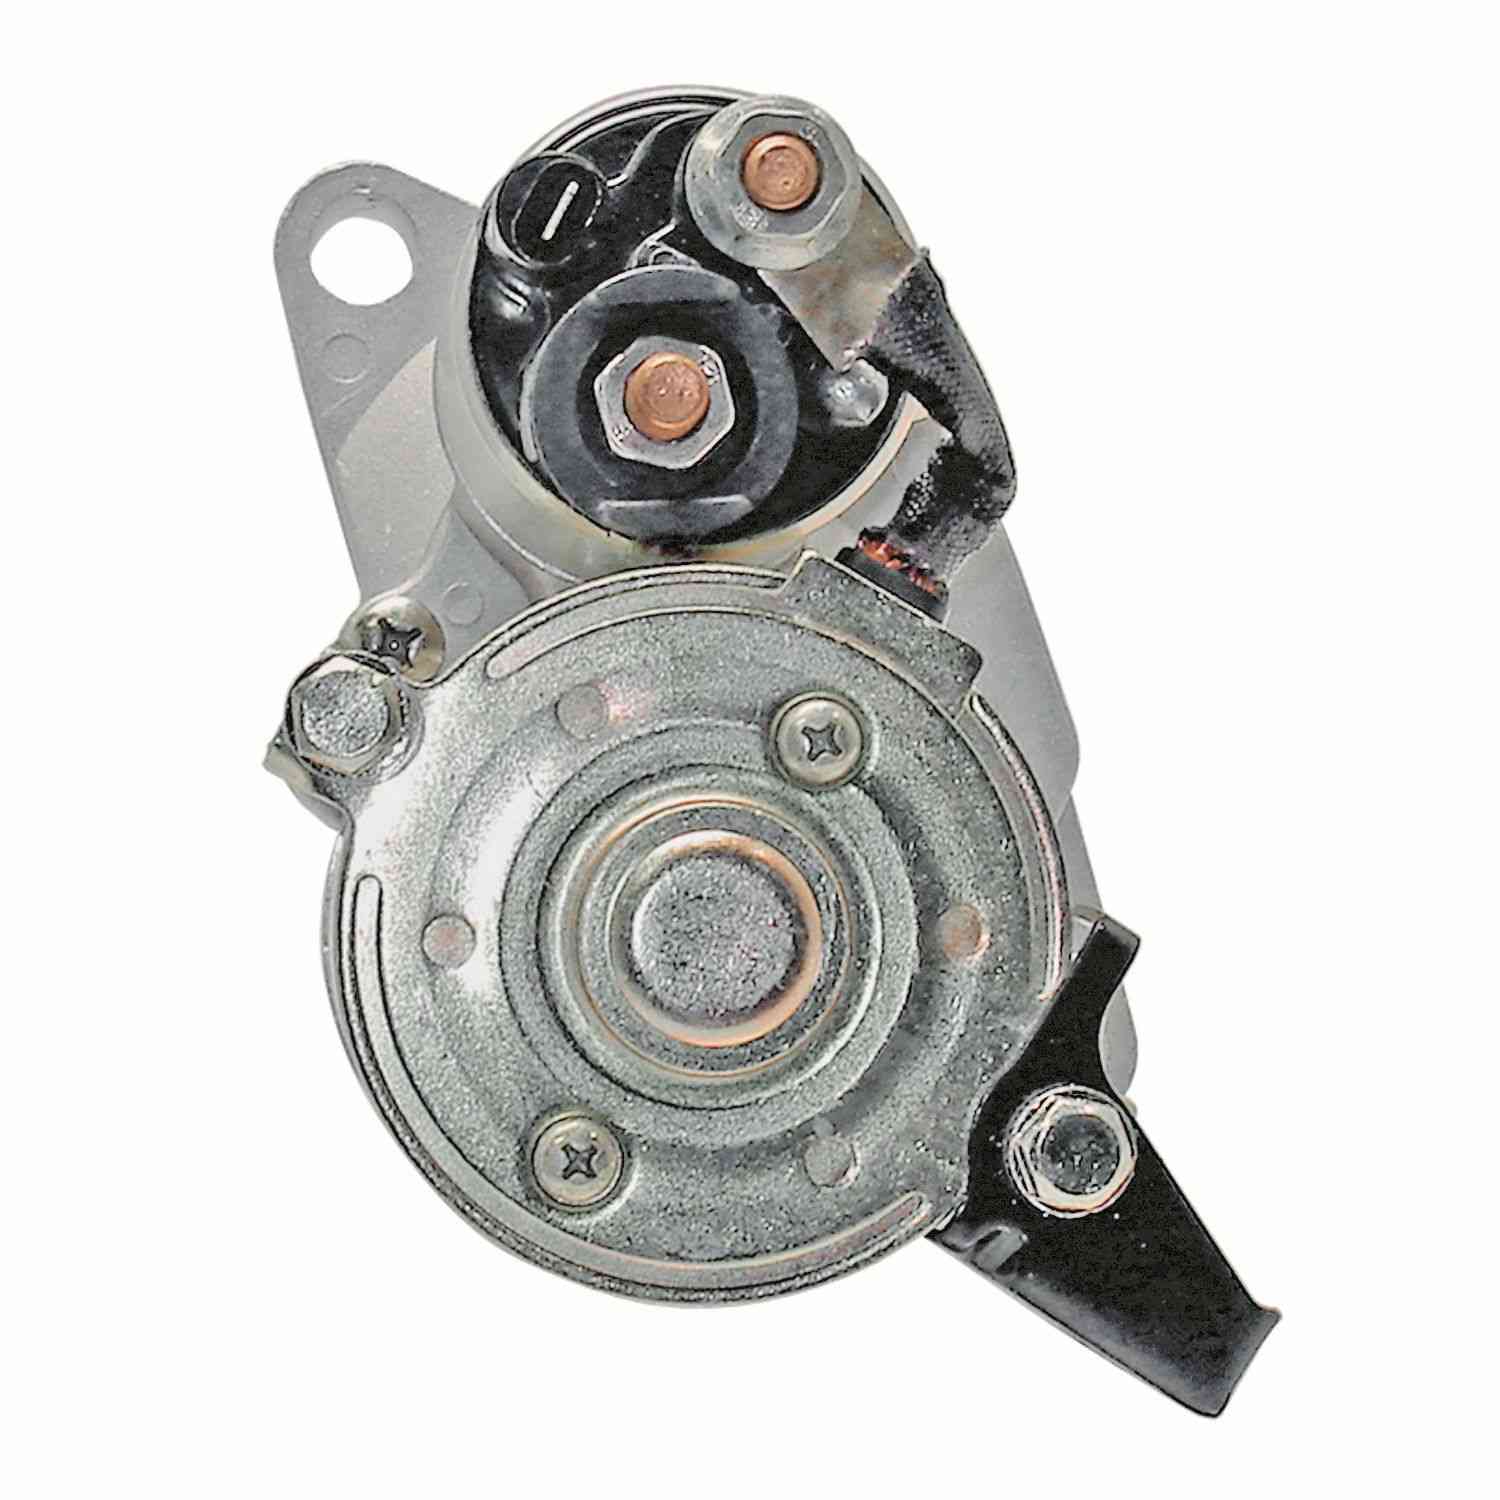 ACDELCO GOLD/PROFESSIONAL - Reman Starter Motor - DCC 336-1670A